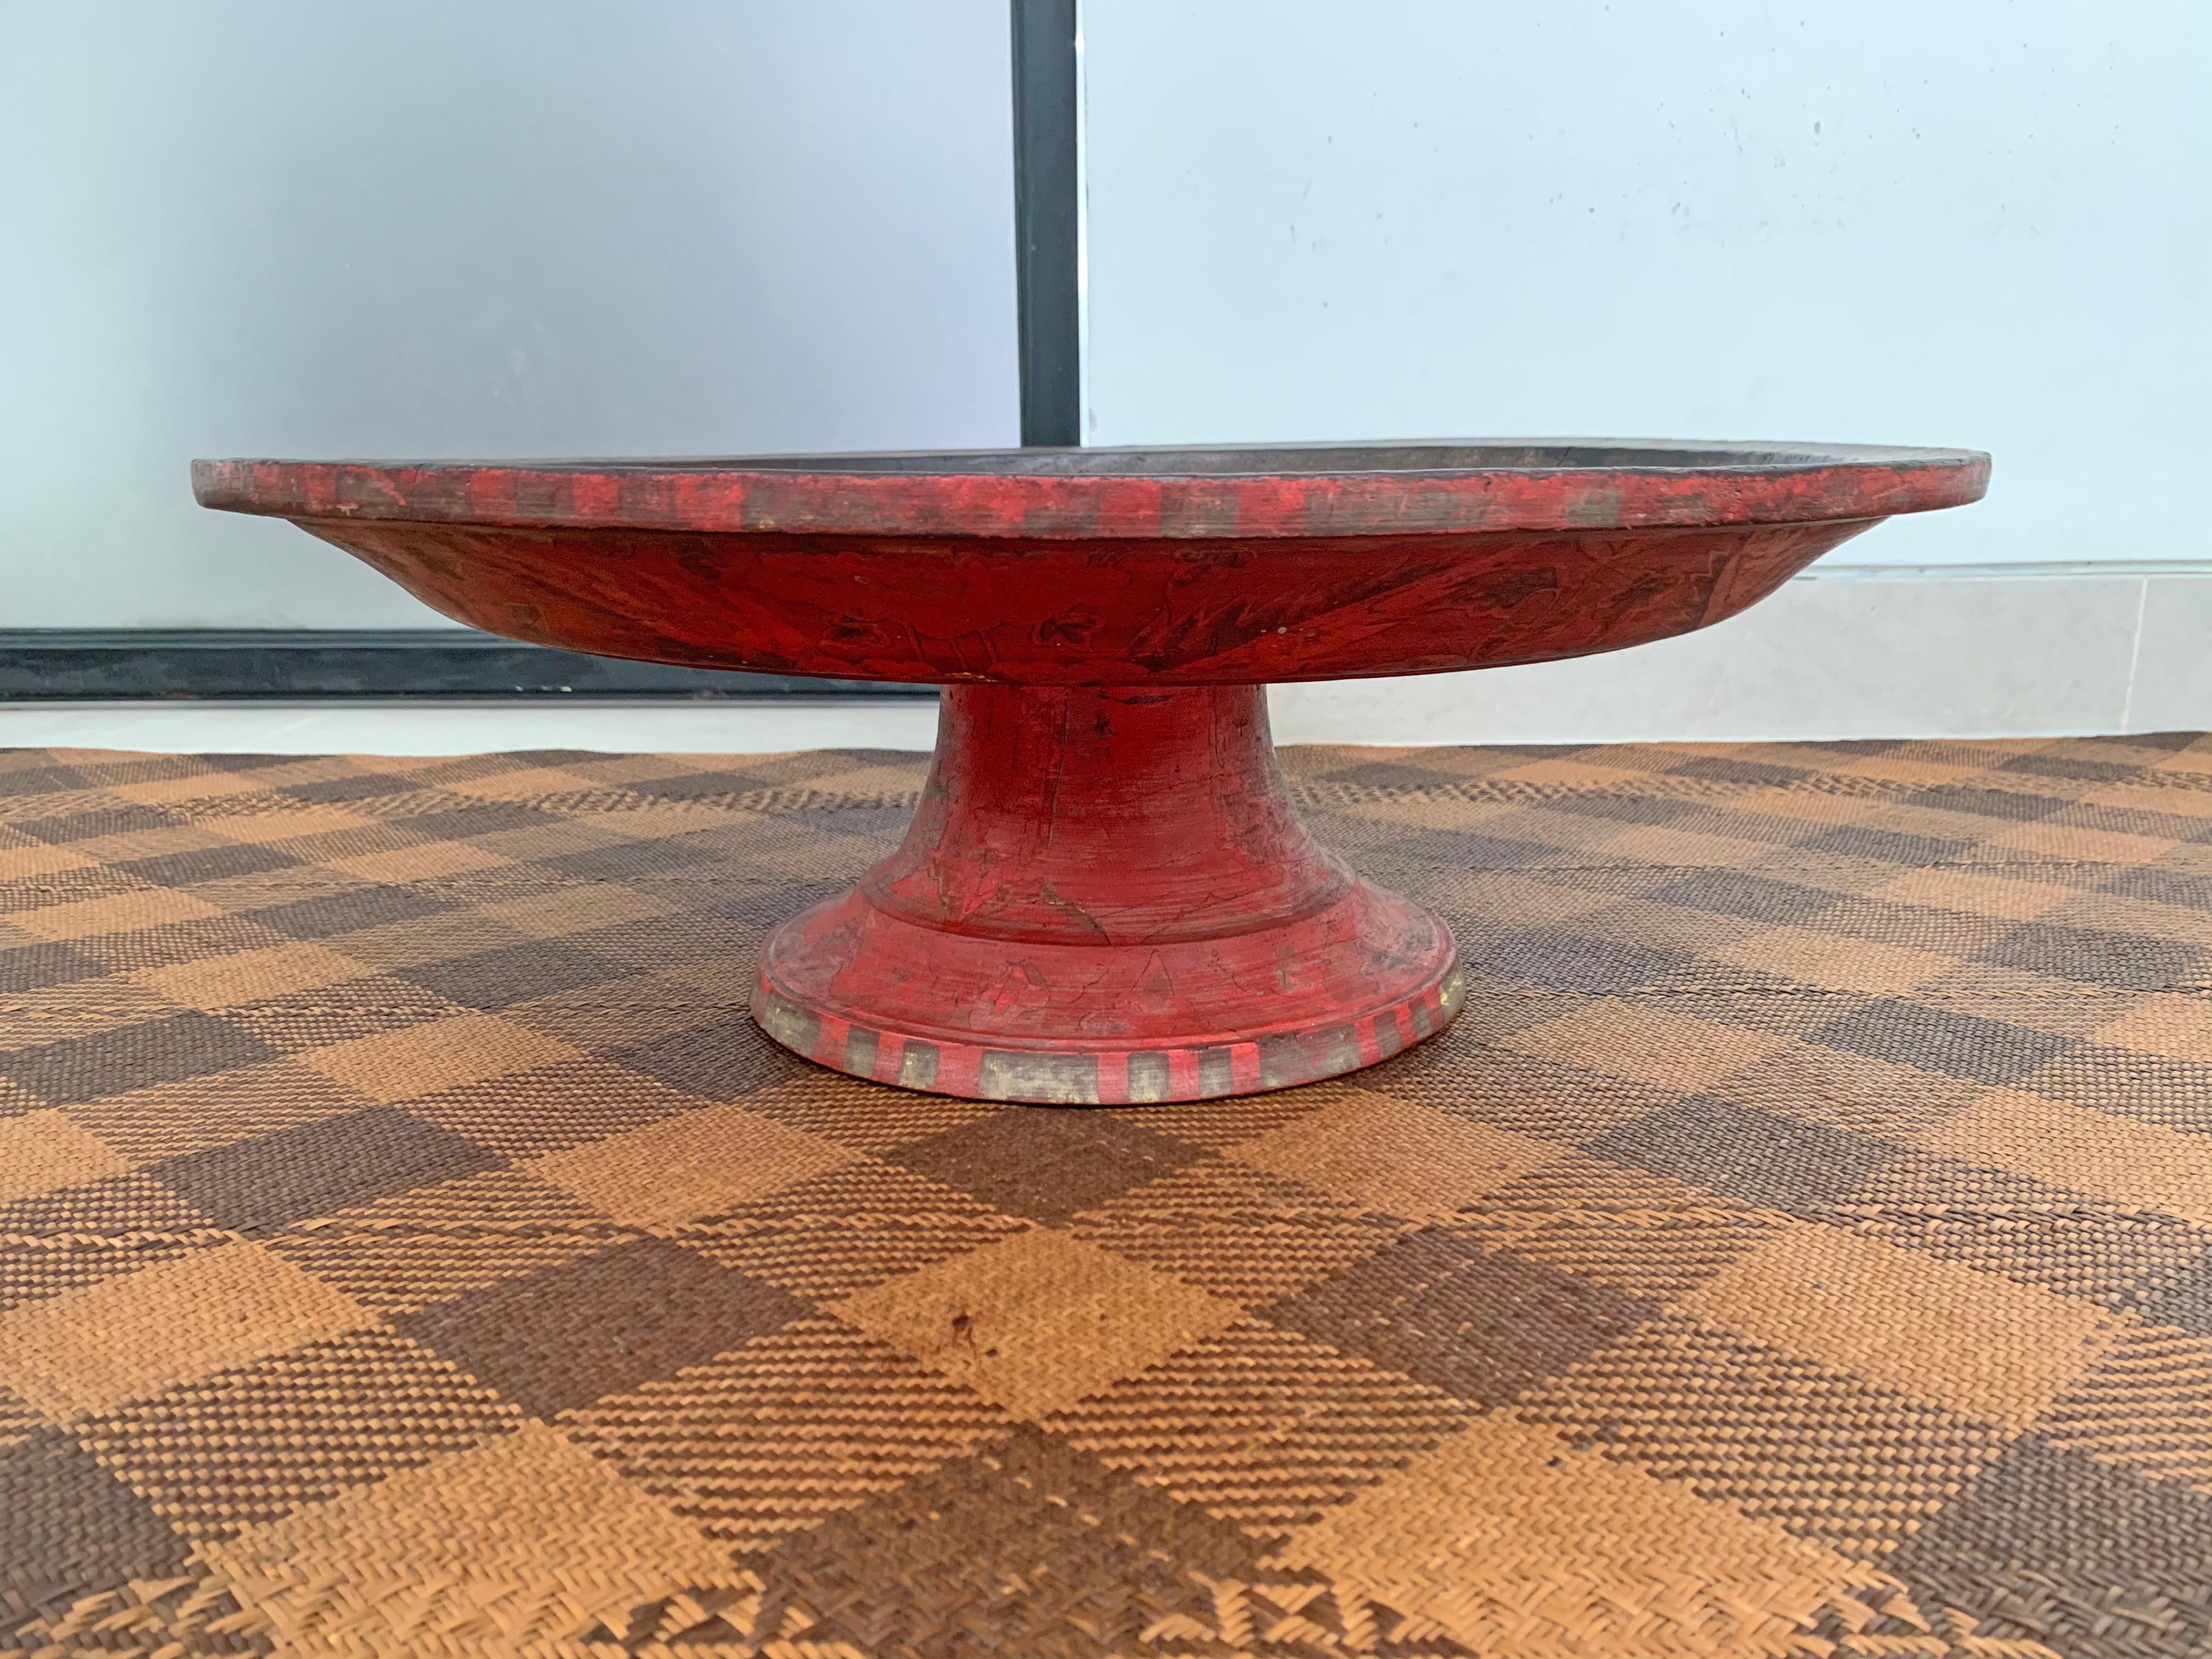 Wood Balinese Temple Offering Tray / Bowl 'Dulang' Floral Motifs & Red Polychrome For Sale